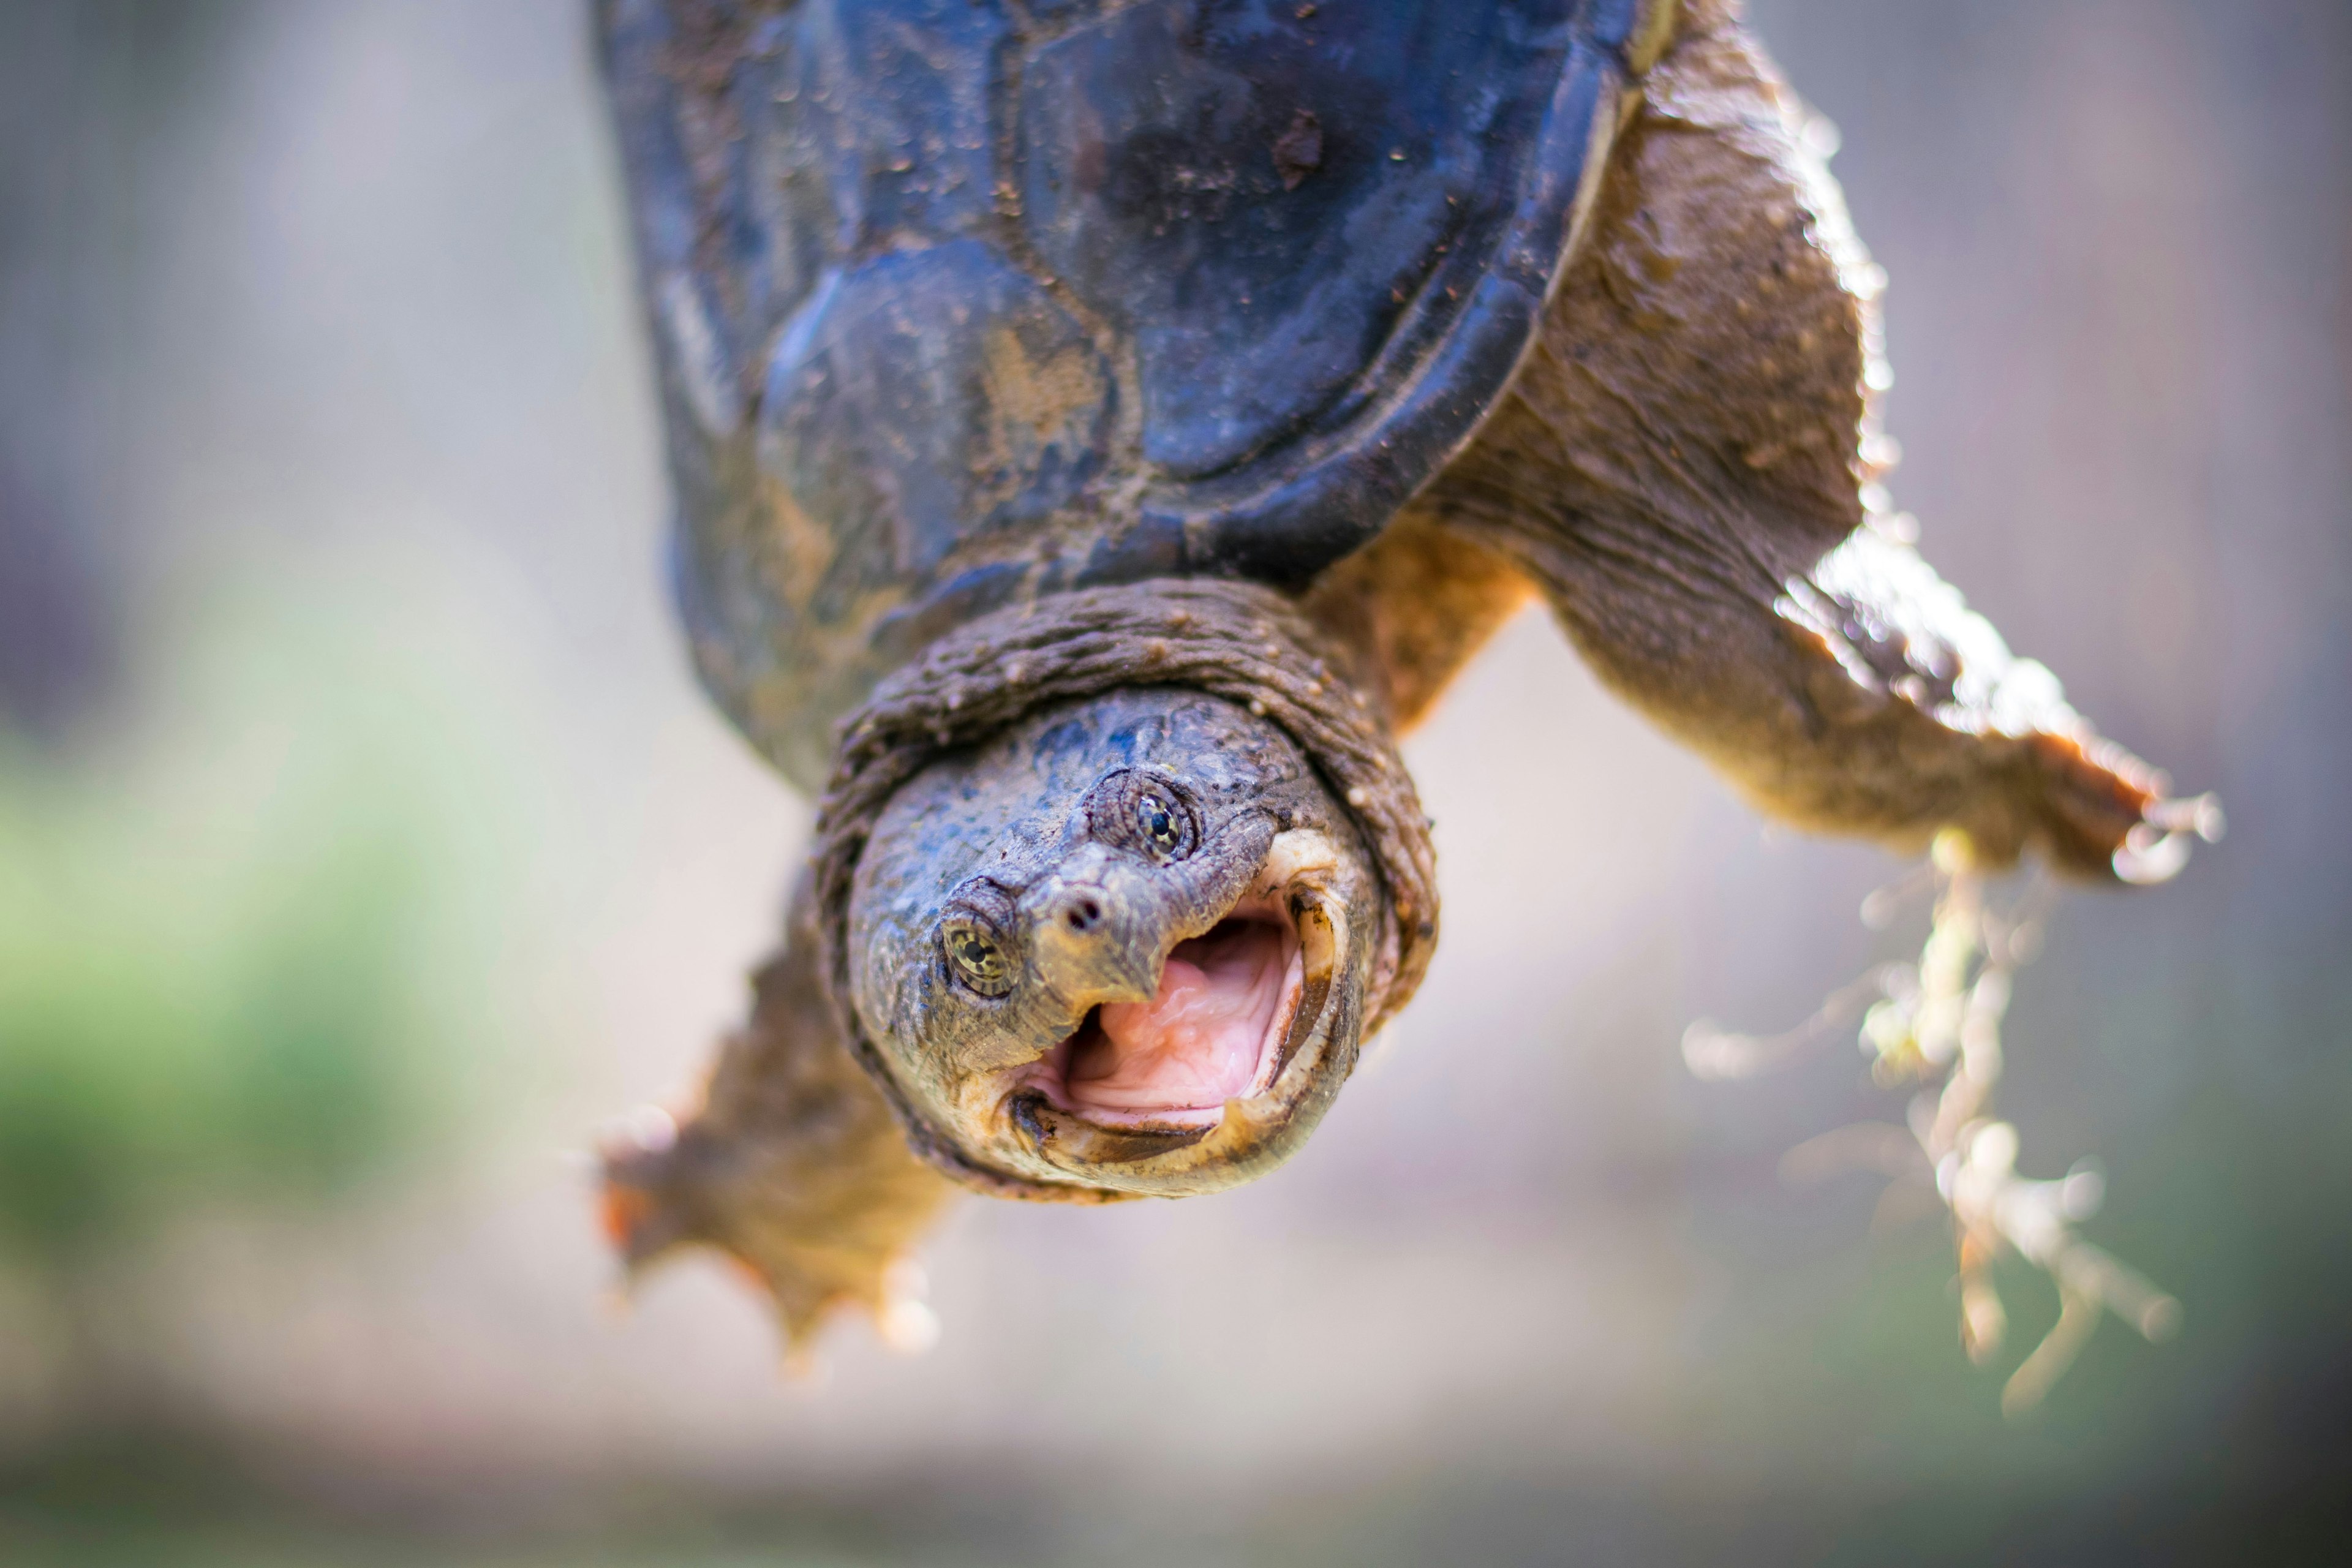 snapping turtle with its mouth open